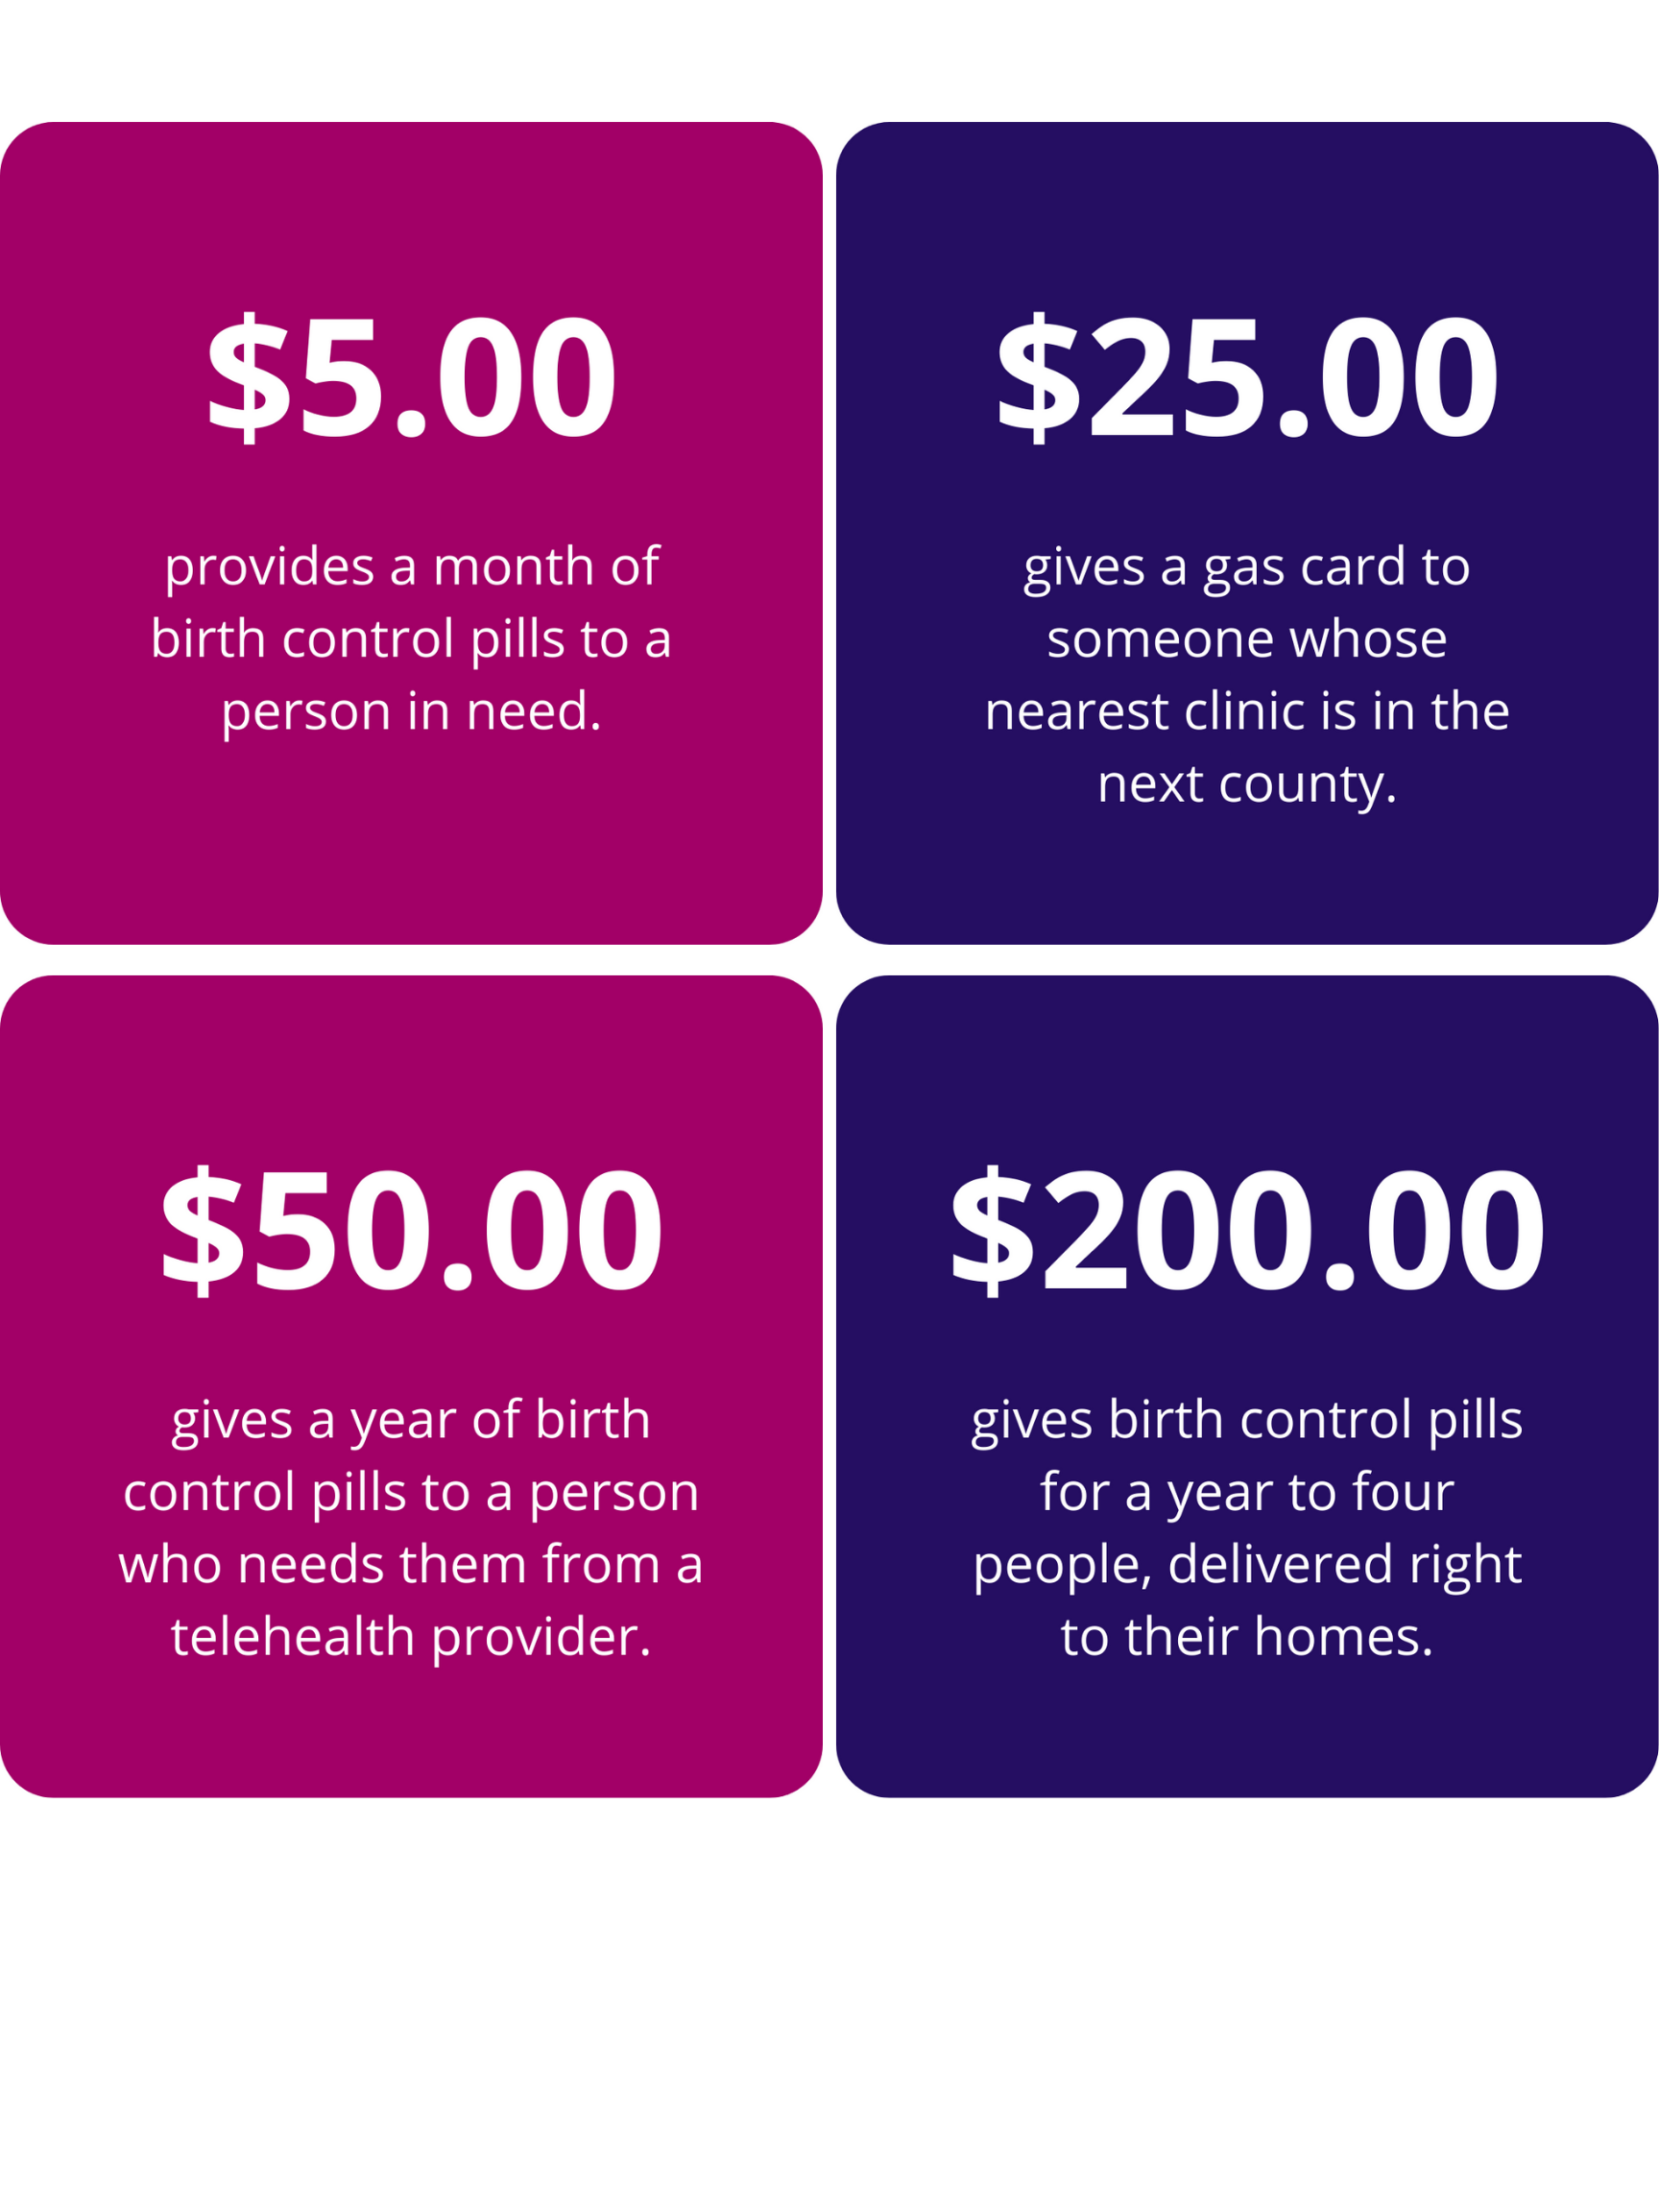 Four tiles each with a different donation dollar amount. Upper left: A purple card that reads, "$5 provides a month of birth control pills to a person in need." Upper right: A blue card that reads, "$25 gives a gas card to someone whose nearest clinic is in the next county." Lower left: A purple card that reads, "$50 gives a year of birth control pills to a person who needs them from a telehealth provider." Lower right: A blue card that reads, "$200 gives birth control pills for a year to four people, delivered right to their homes."